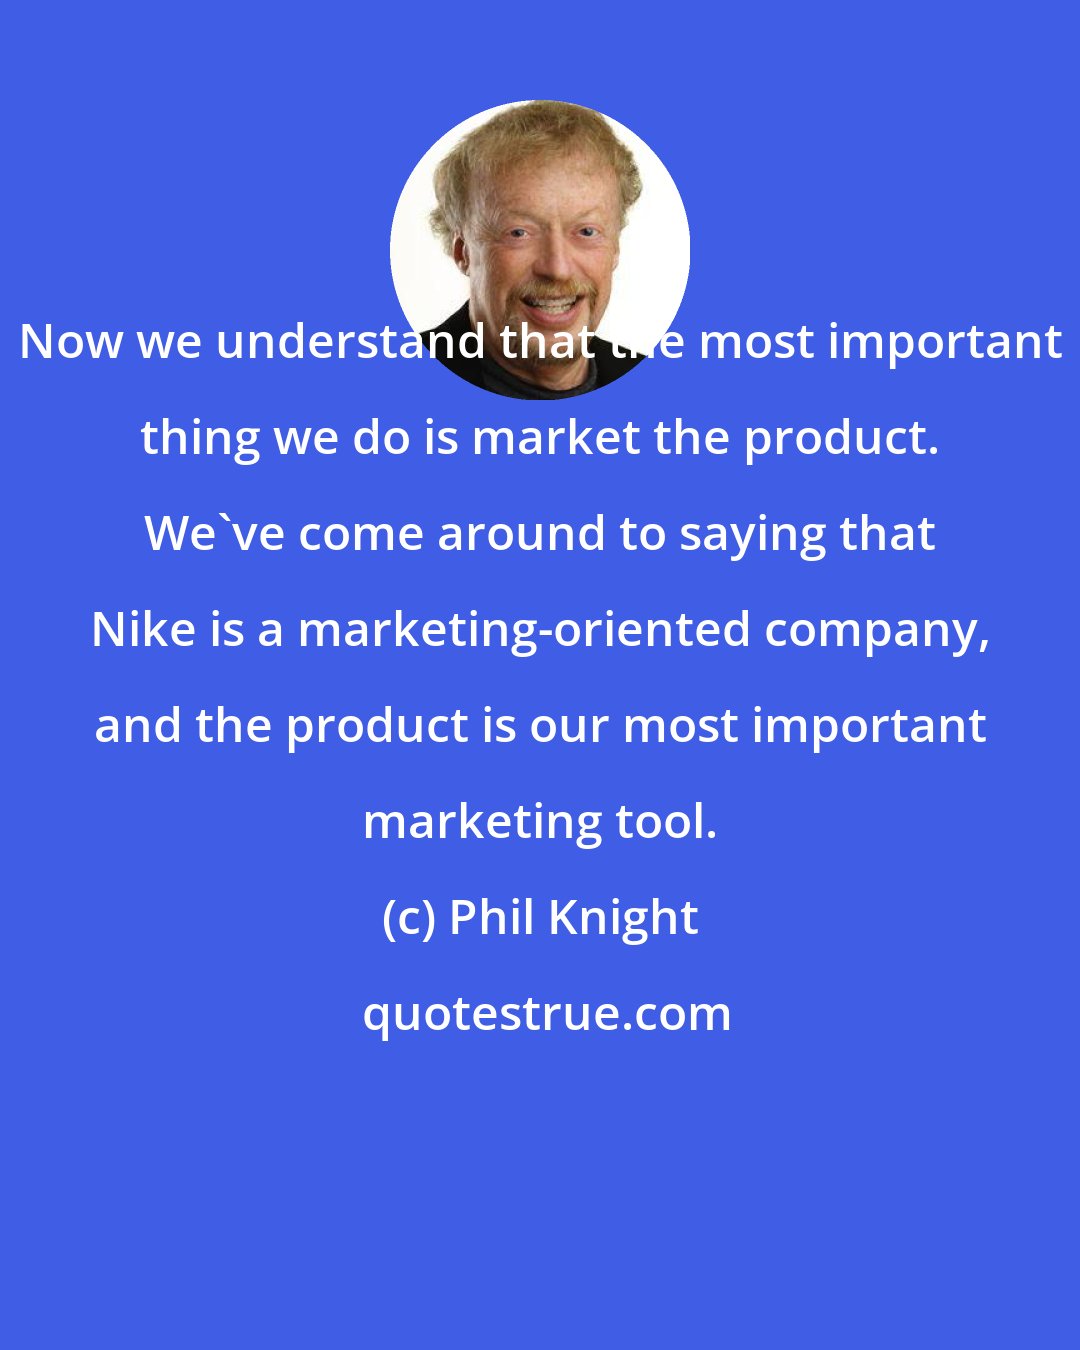 Phil Knight: Now we understand that the most important thing we do is market the product. We've come around to saying that Nike is a marketing-oriented company, and the product is our most important marketing tool.